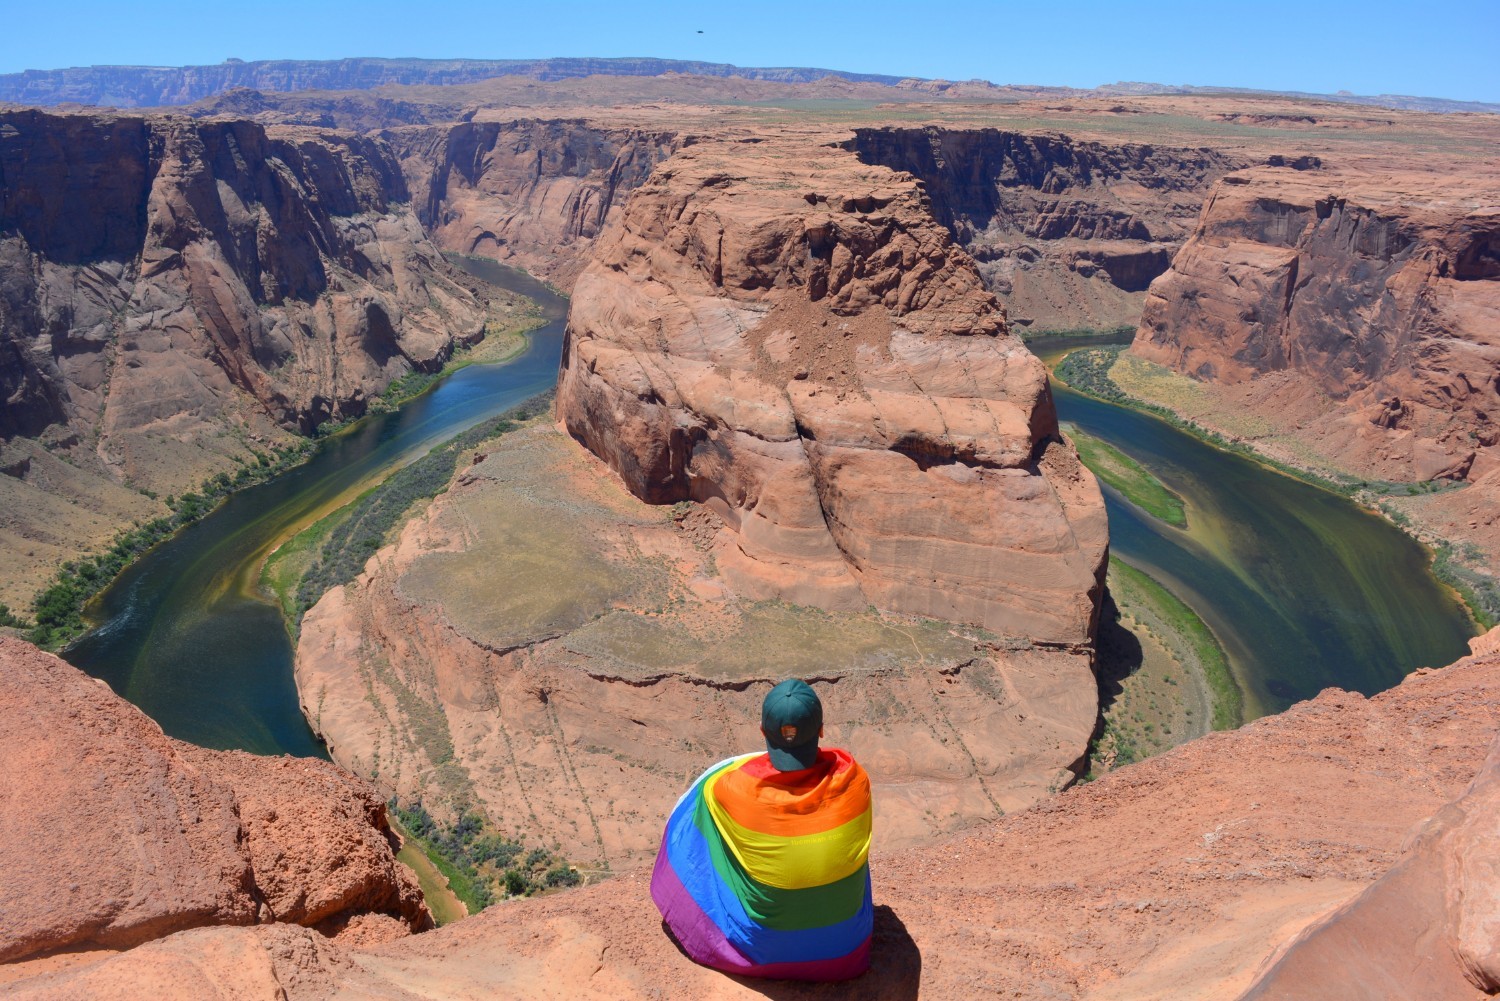 Mikah Meyer wearing a rainbow pride flag as he looks out over Horseshoe Bend